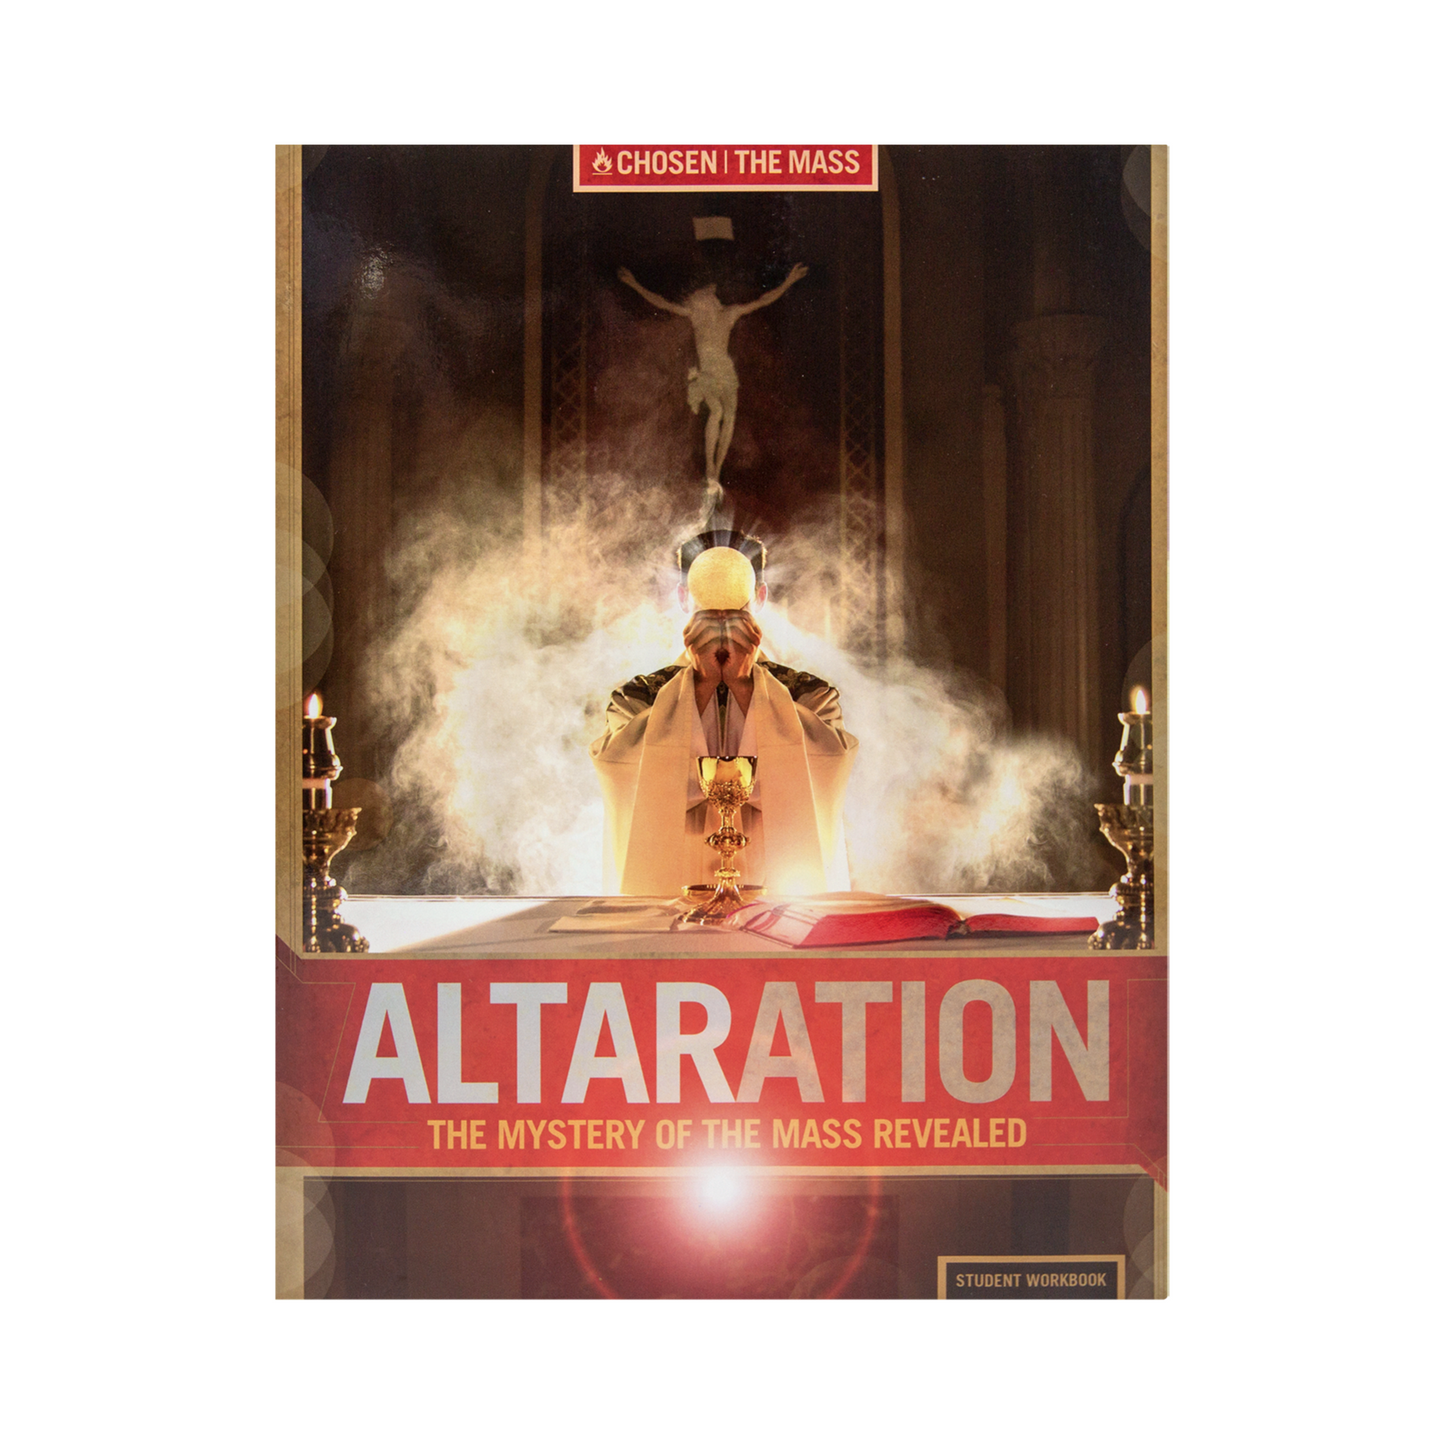 Altaration The Mystery of the Mass Revealed Student Workbook